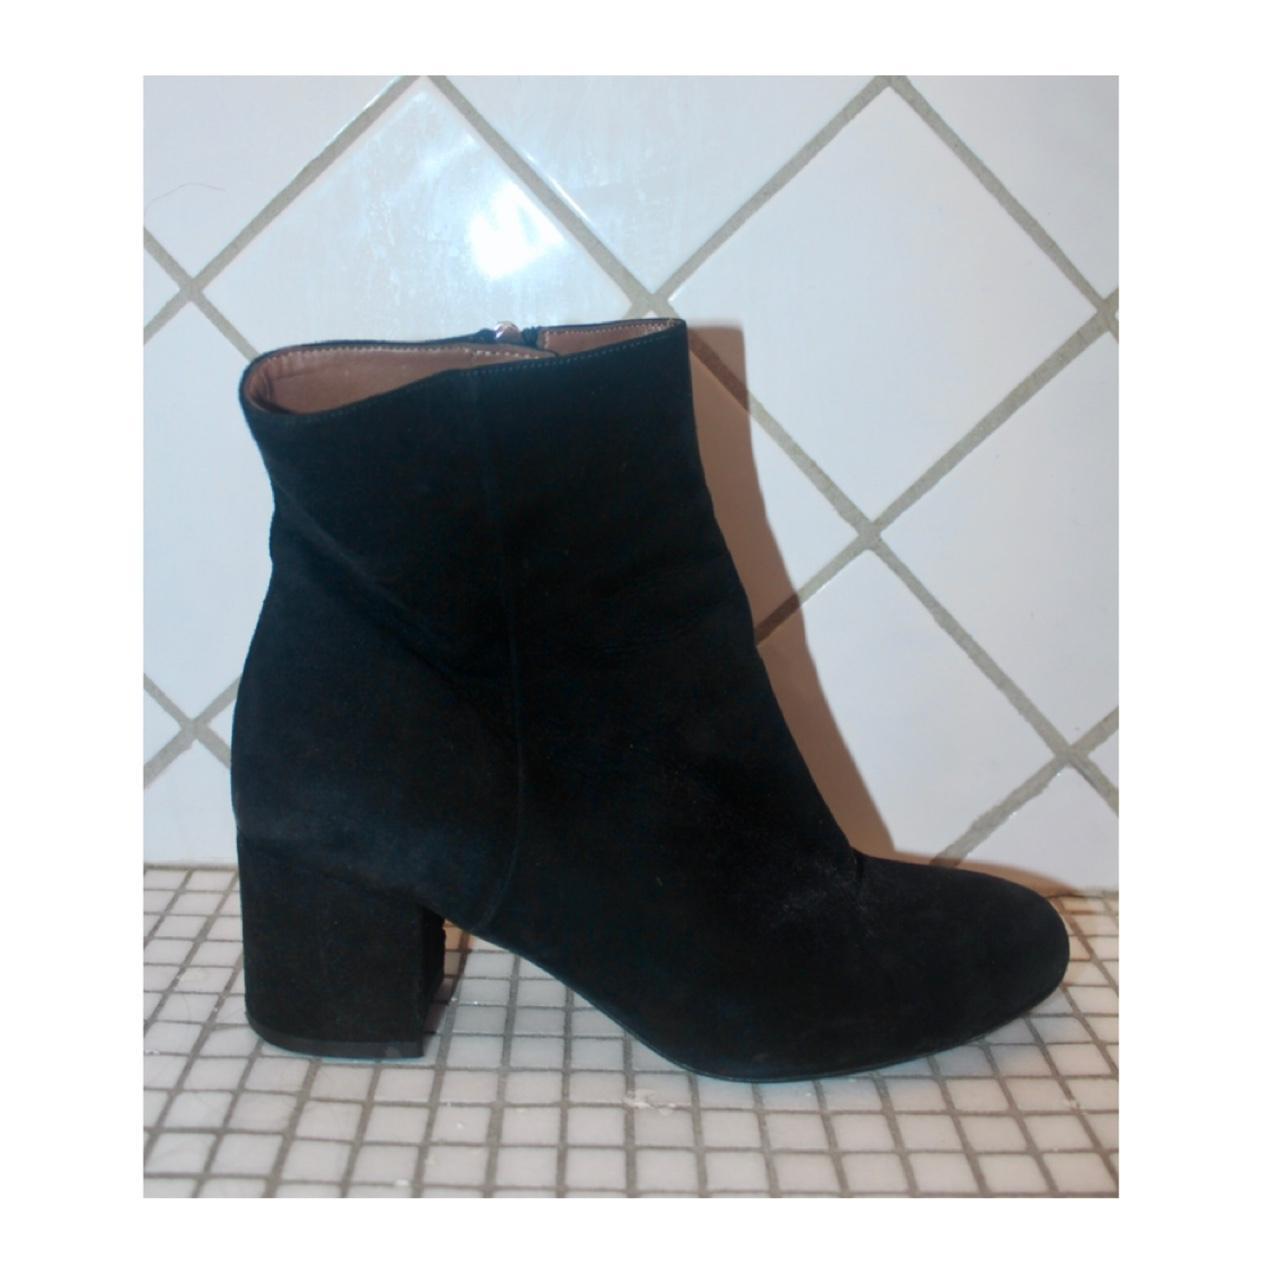 Reiss Suede Block Heeled Ankle Boots Made in Spain... - Depop